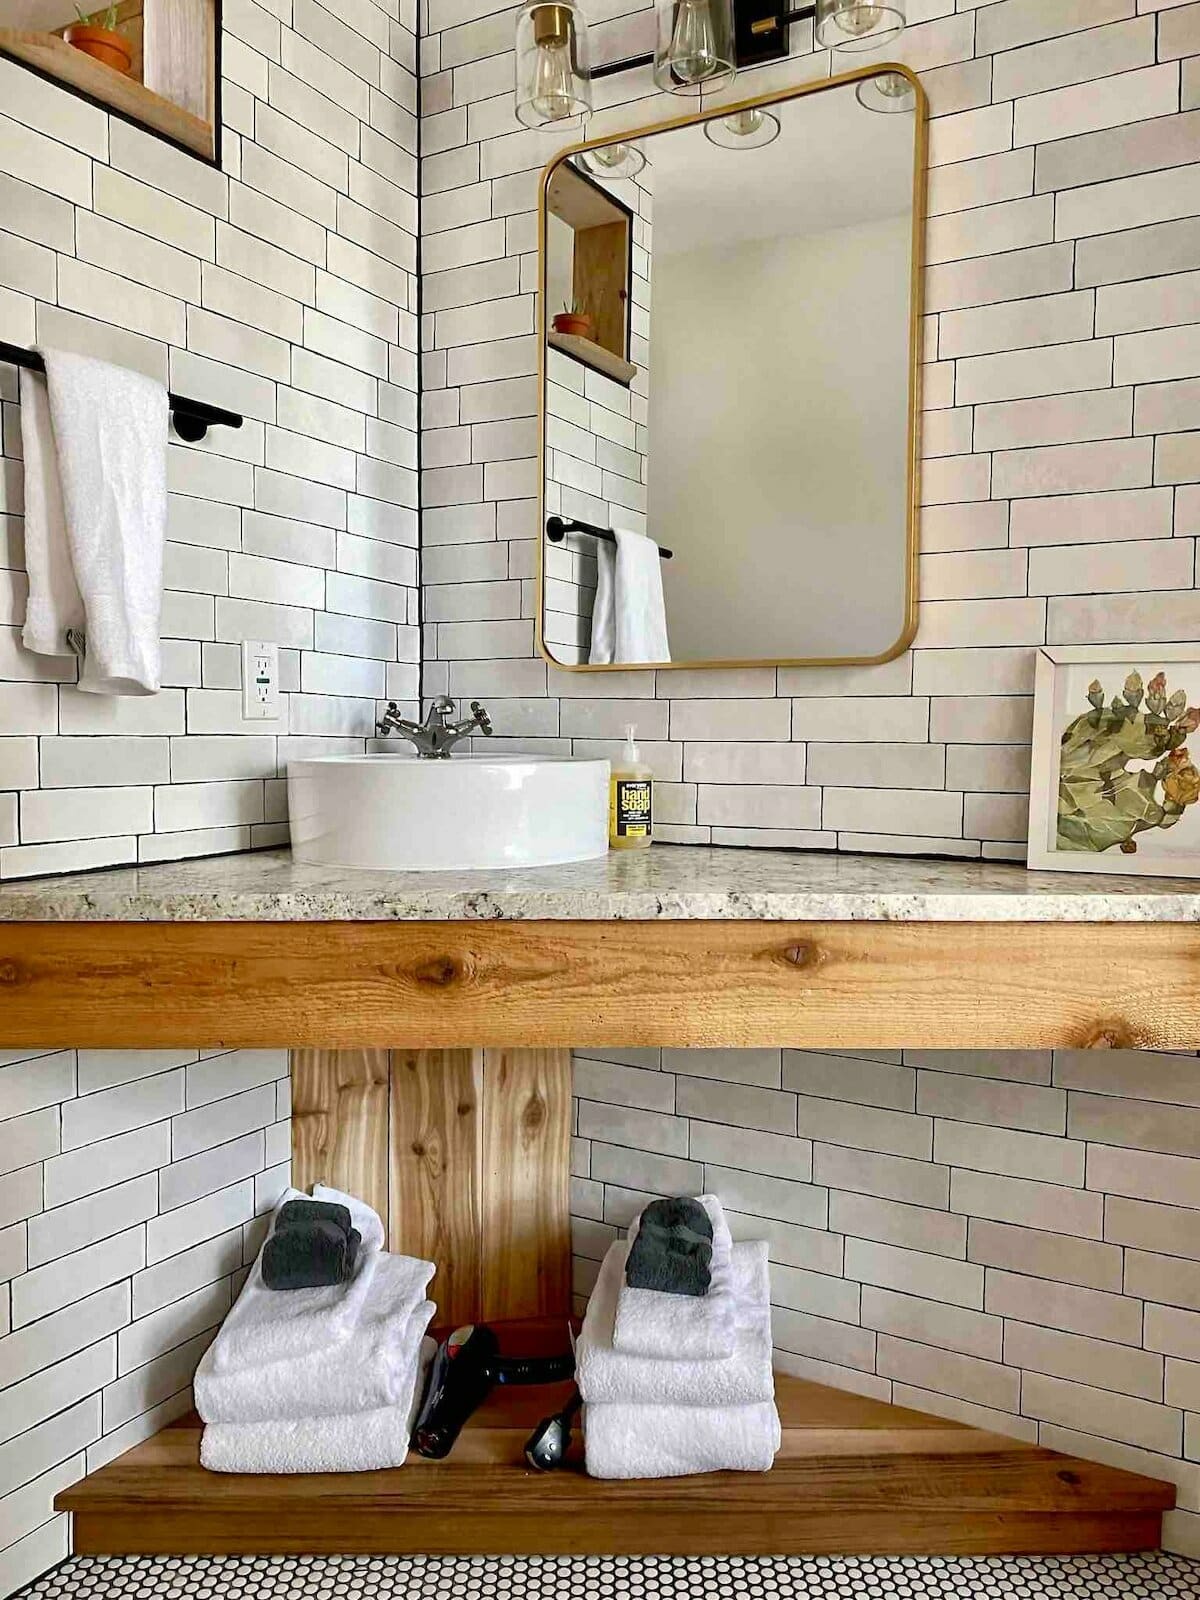 A bathroom corner vanity with a small white honeycomb tile on the floor of the main bathroom space